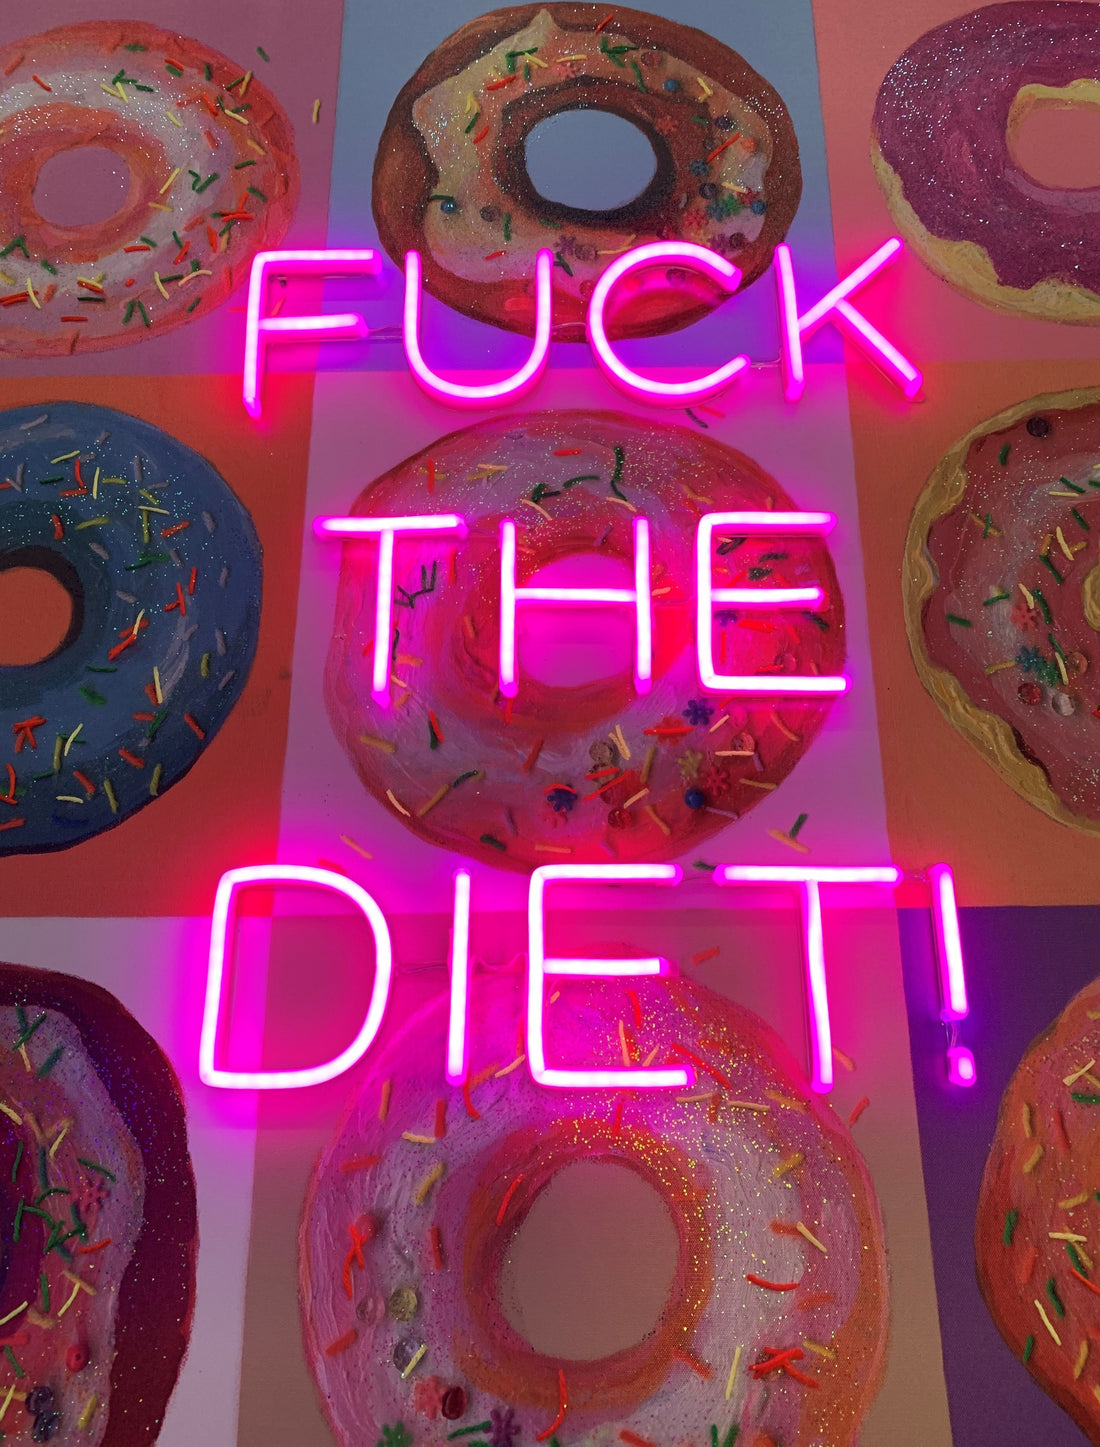 'F the Diet' Wall Artwork with LED Neon (R rated) - STANDARD